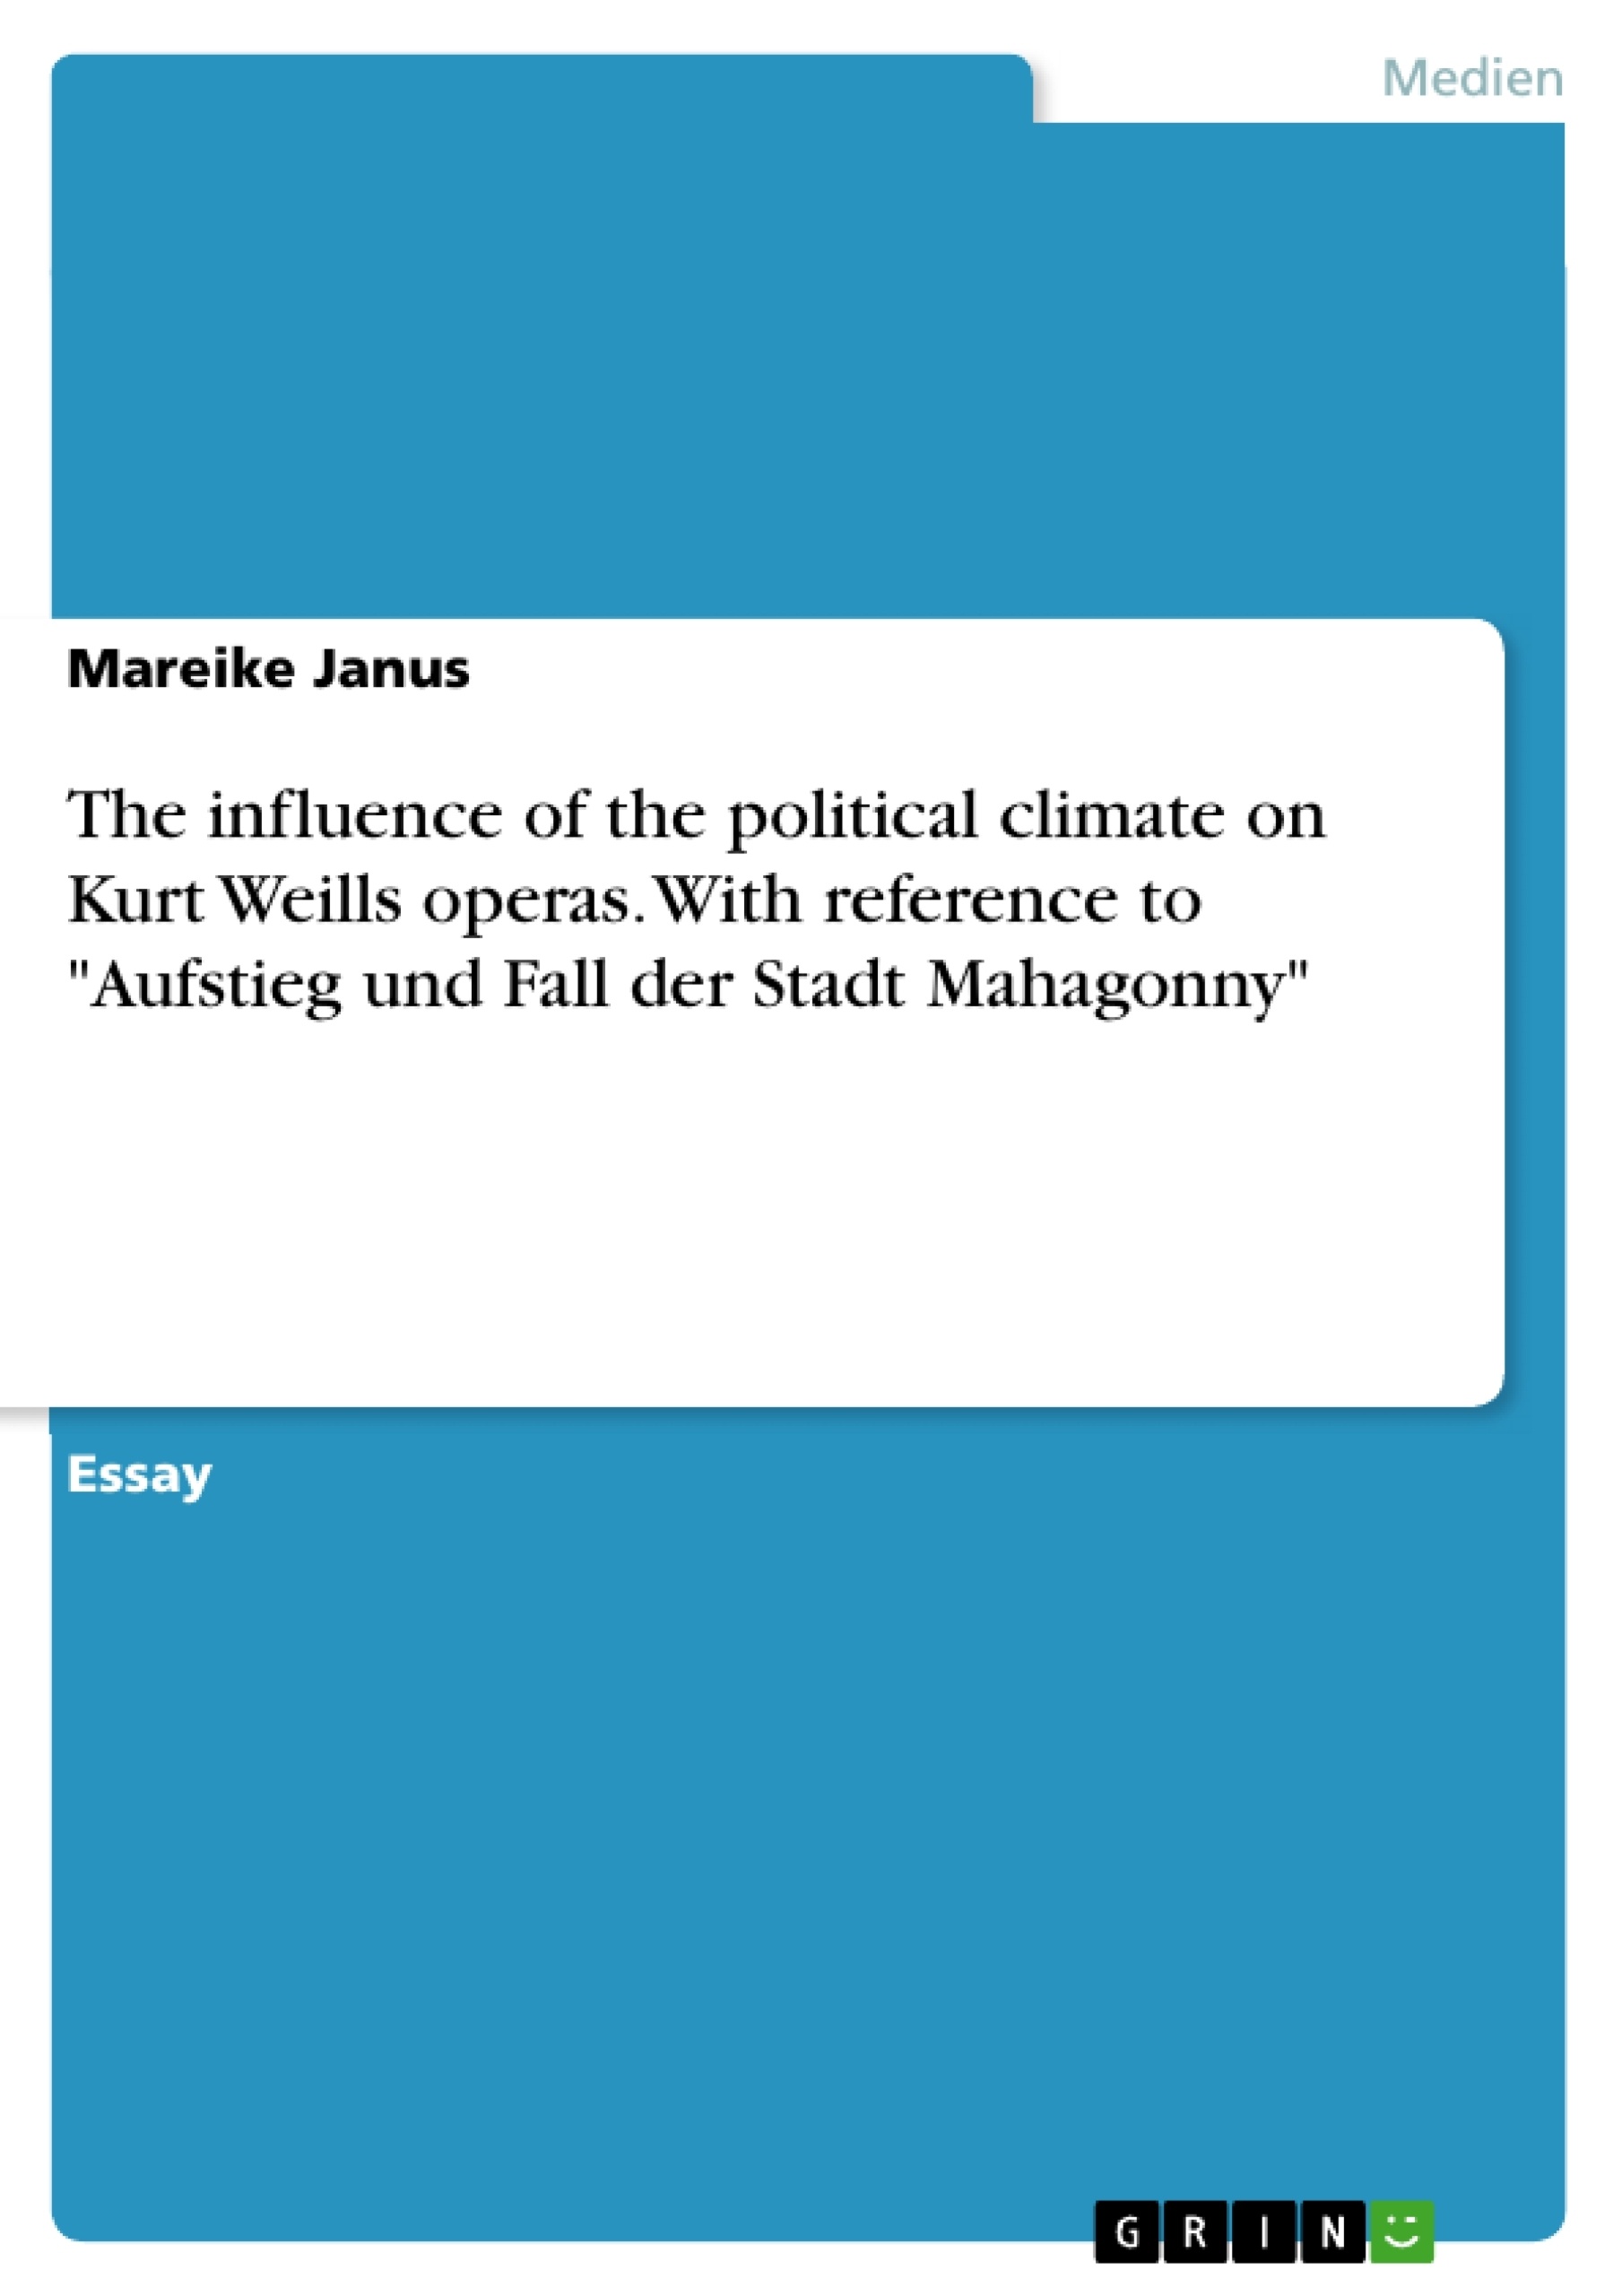 Titre: The influence of the political climate on Kurt Weills operas. With reference to "Aufstieg und Fall der Stadt Mahagonny"